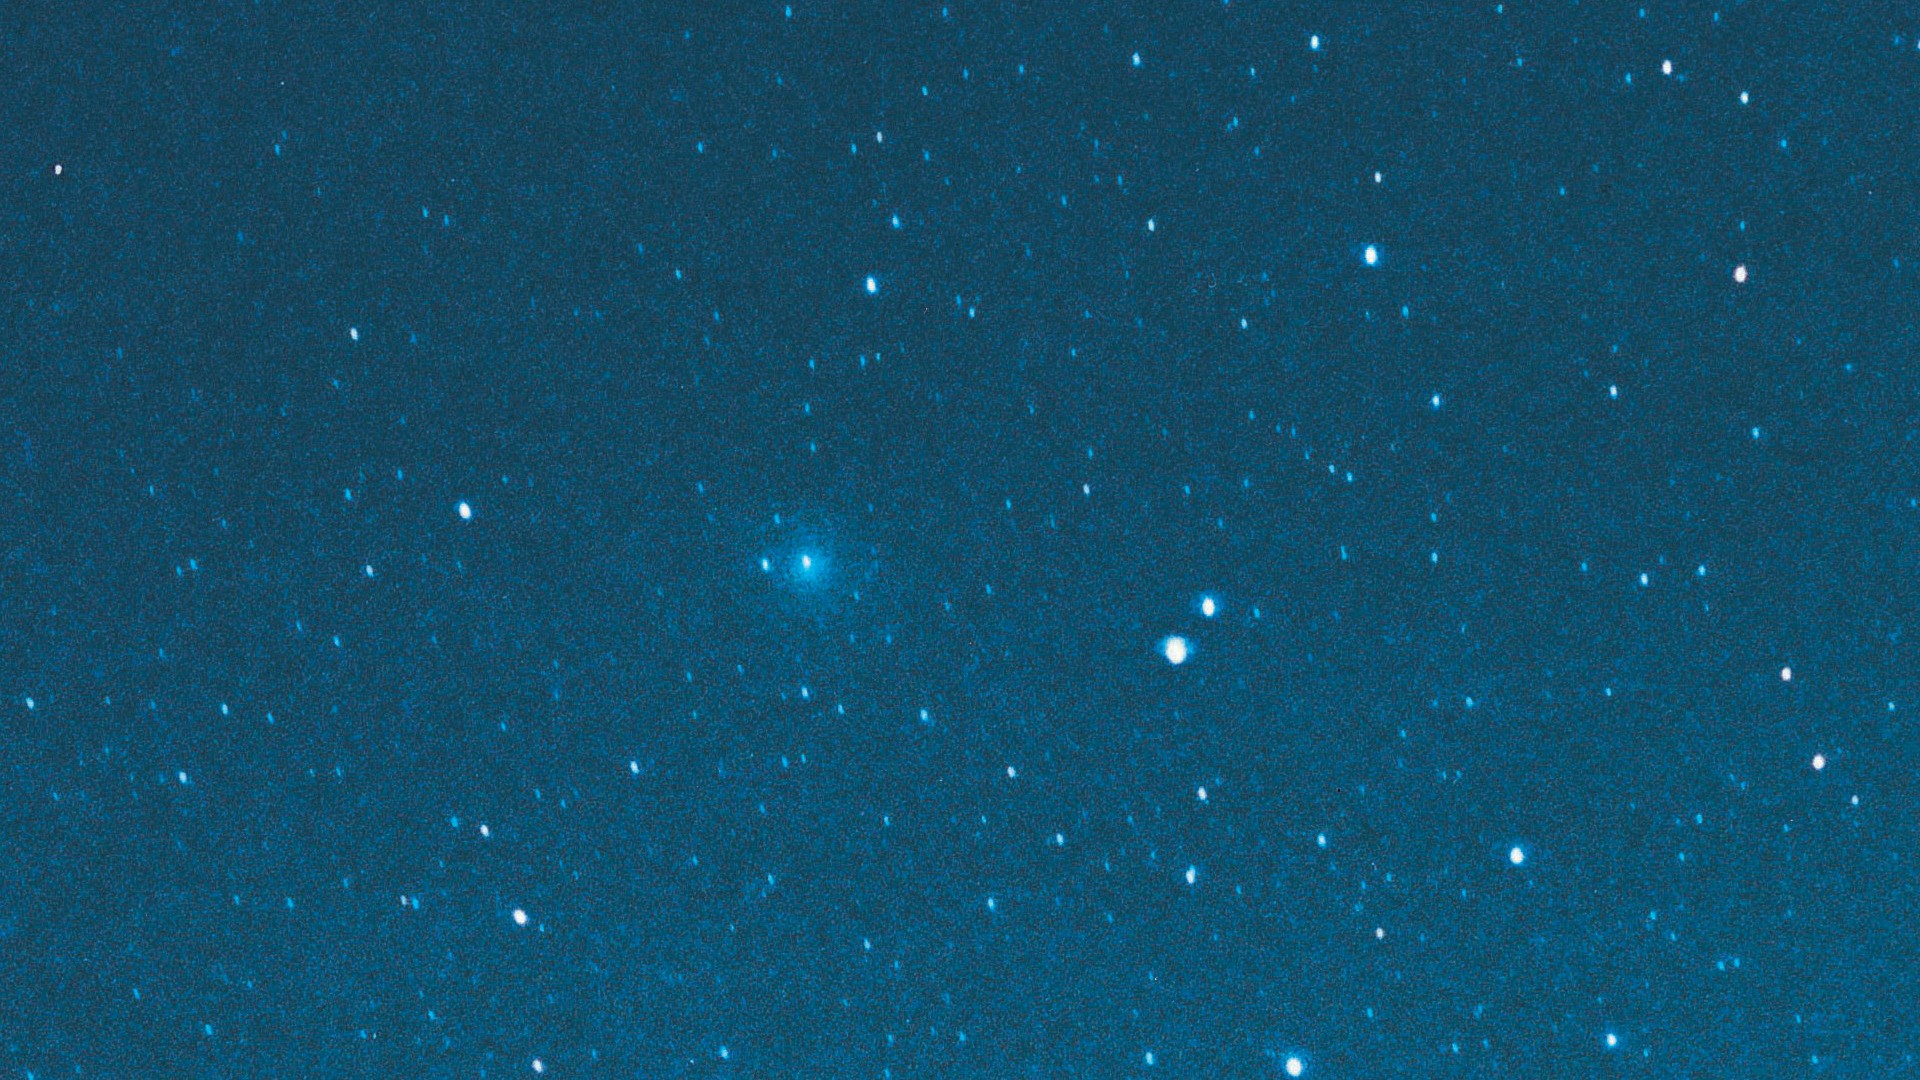  40 years ago, a comet came out of the blue in a surprise Earth flyby. Here's what we know now. 